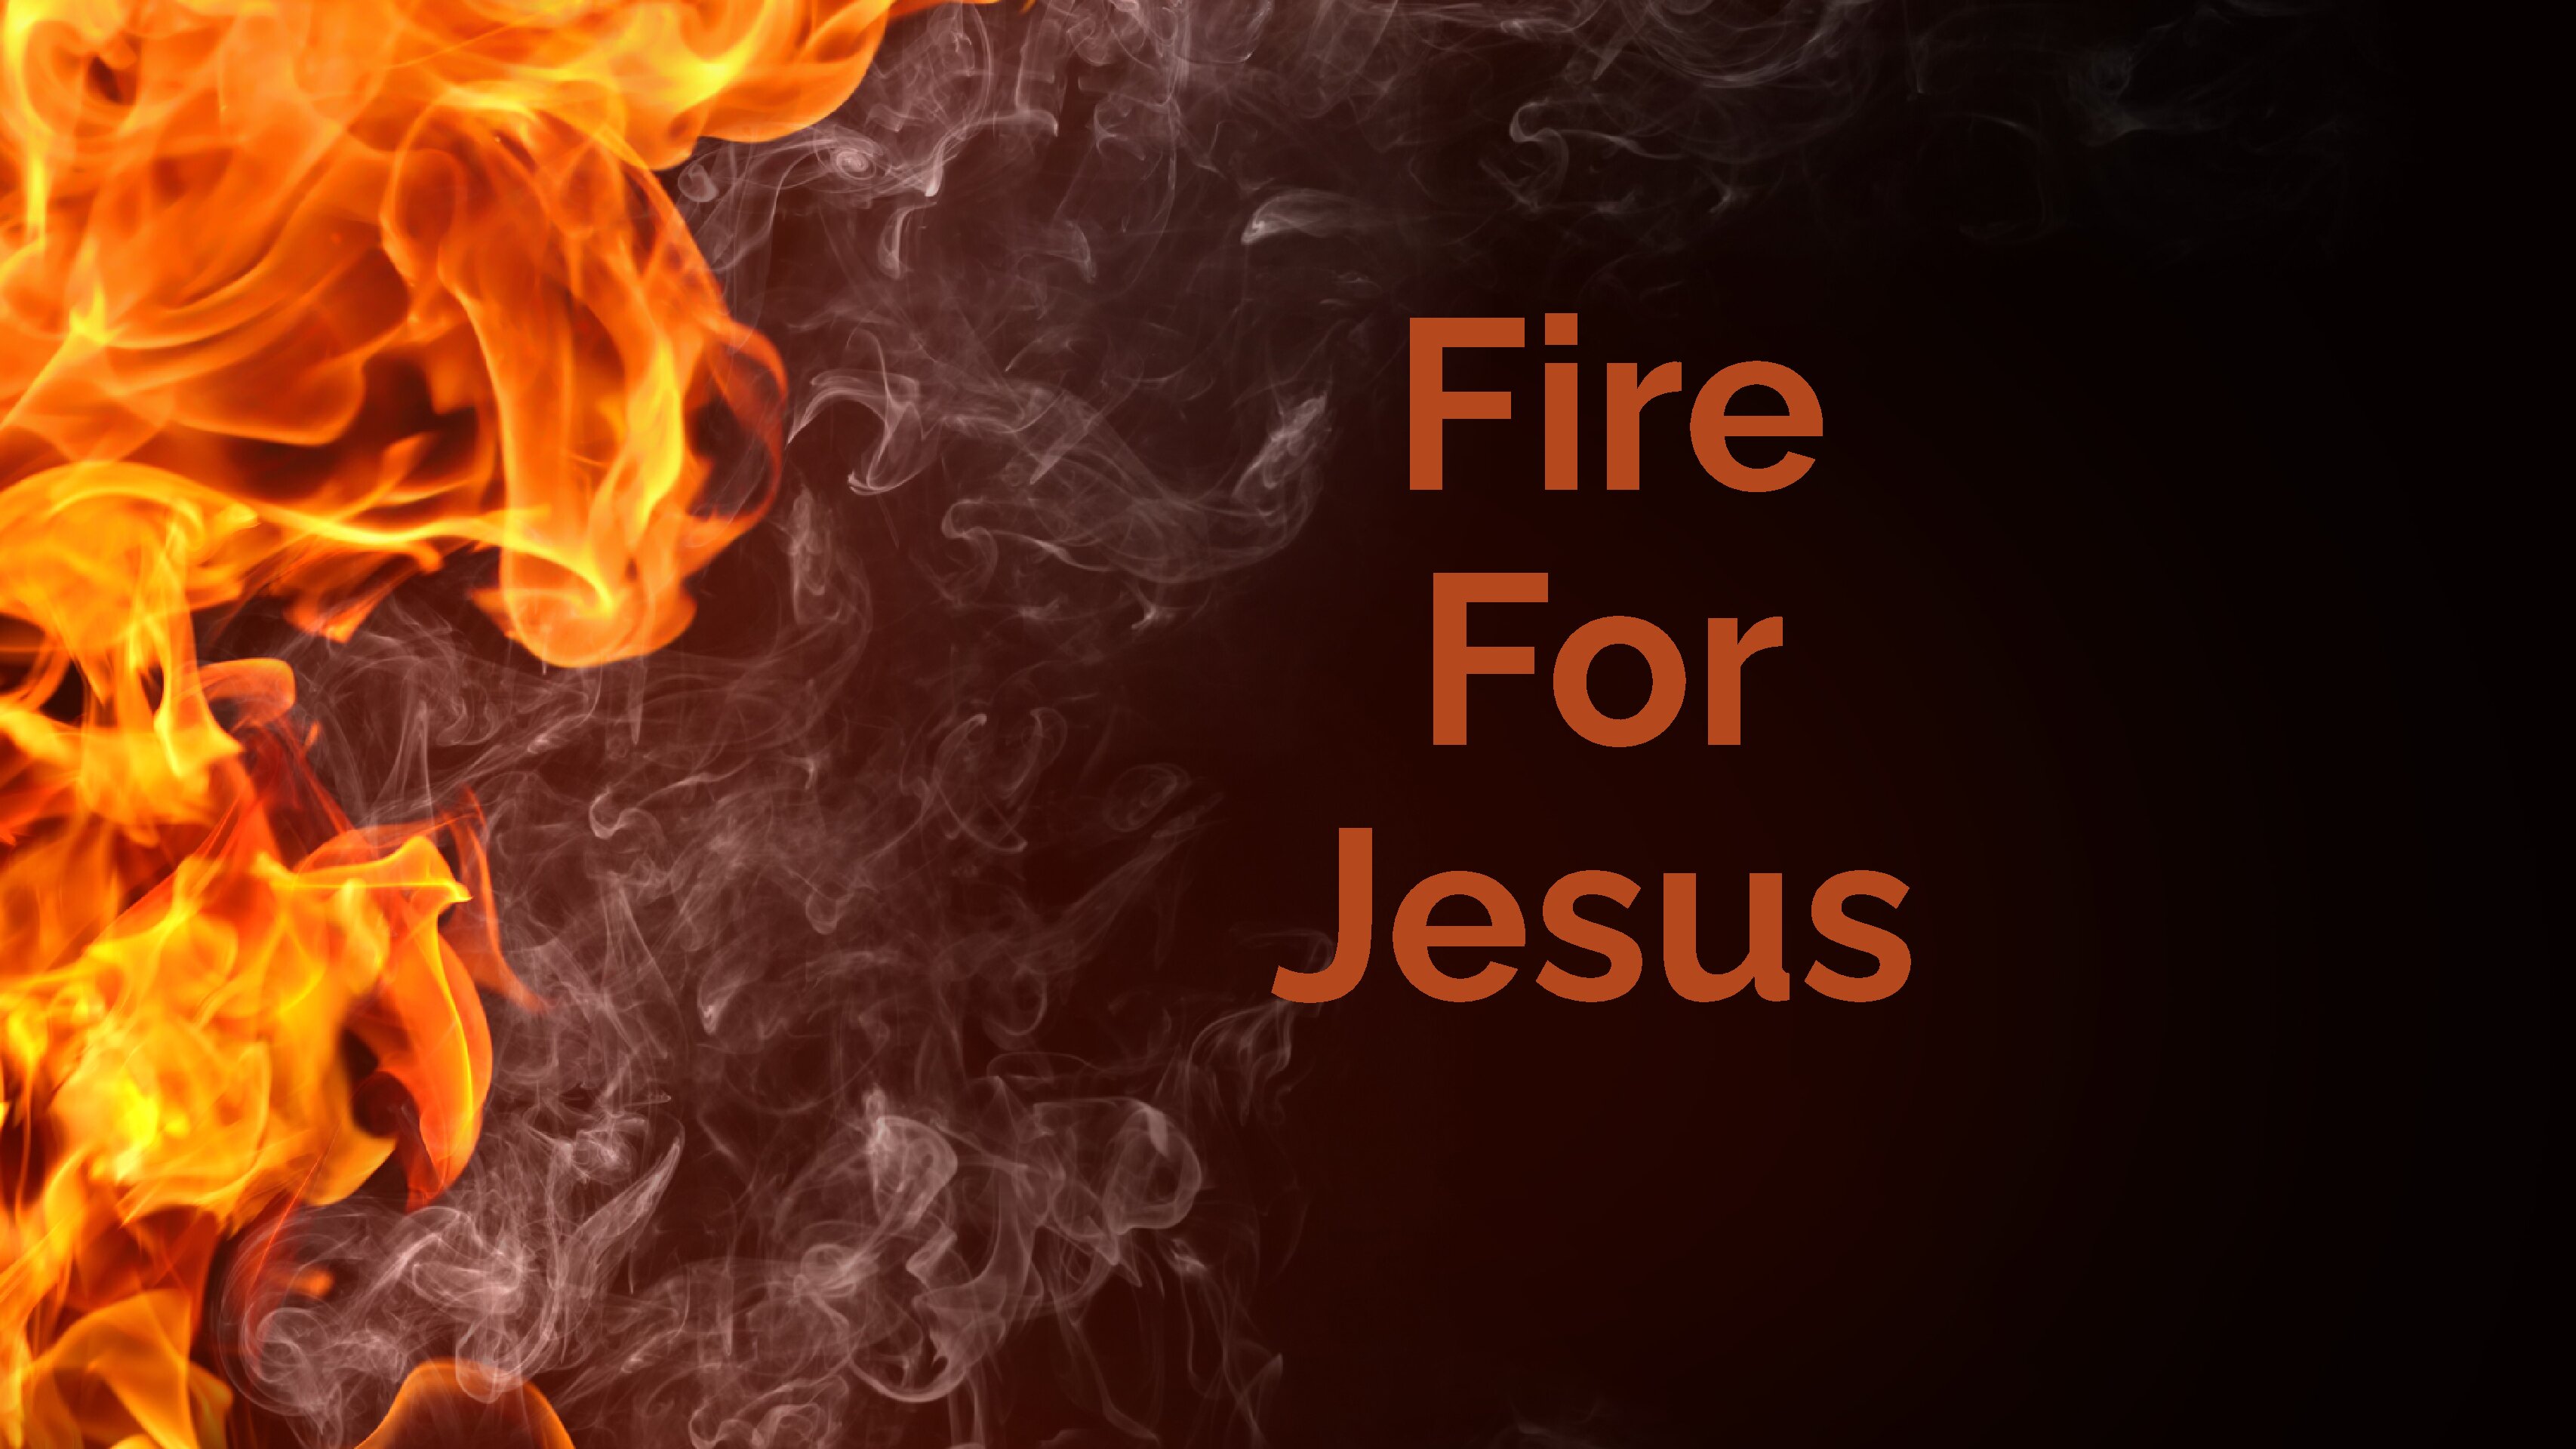 Fire For Jesus